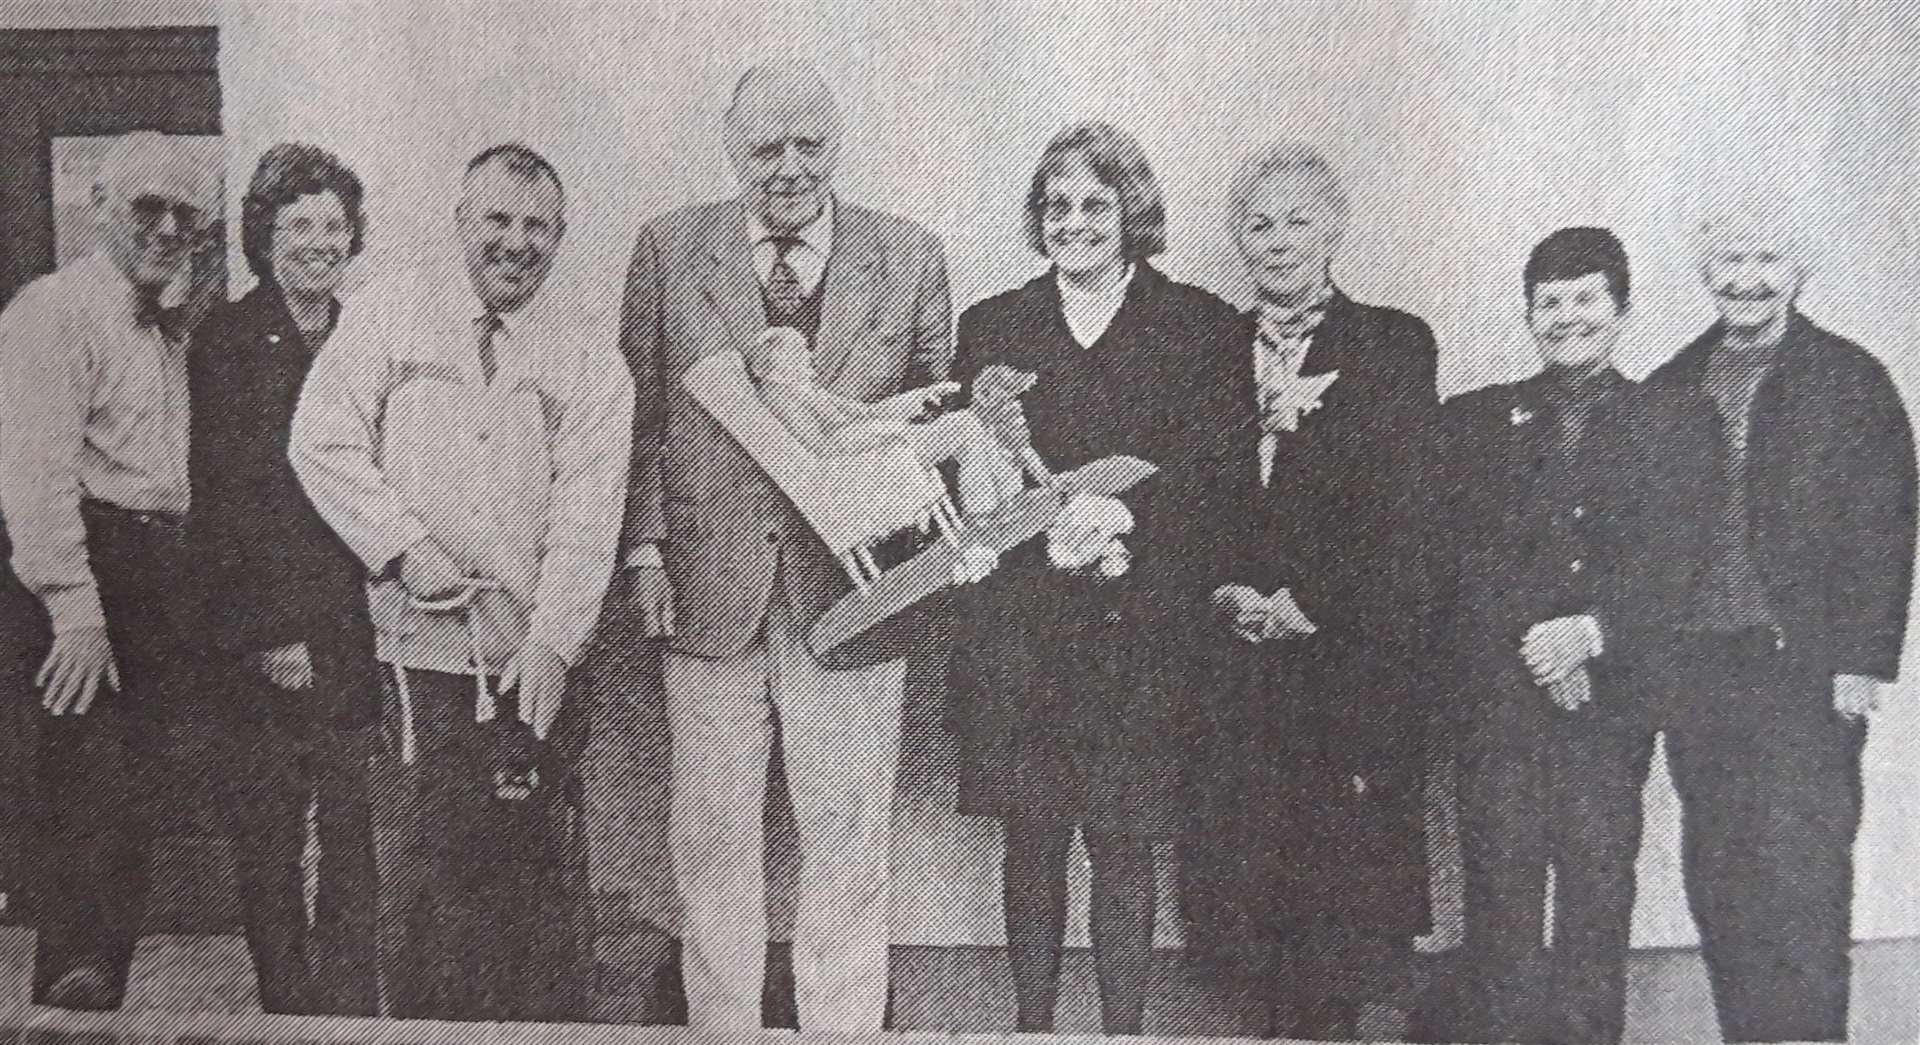 Committee joint secretary Agnes Calder presents the weather vane to Col. Sir Allan Gilmour, in the company of fellow members, from left, Russell Taylor, Christine Milne, Stuart Milne with Toddy the dog, Phyllis Ross, Alice Grant and Janet Maclean.